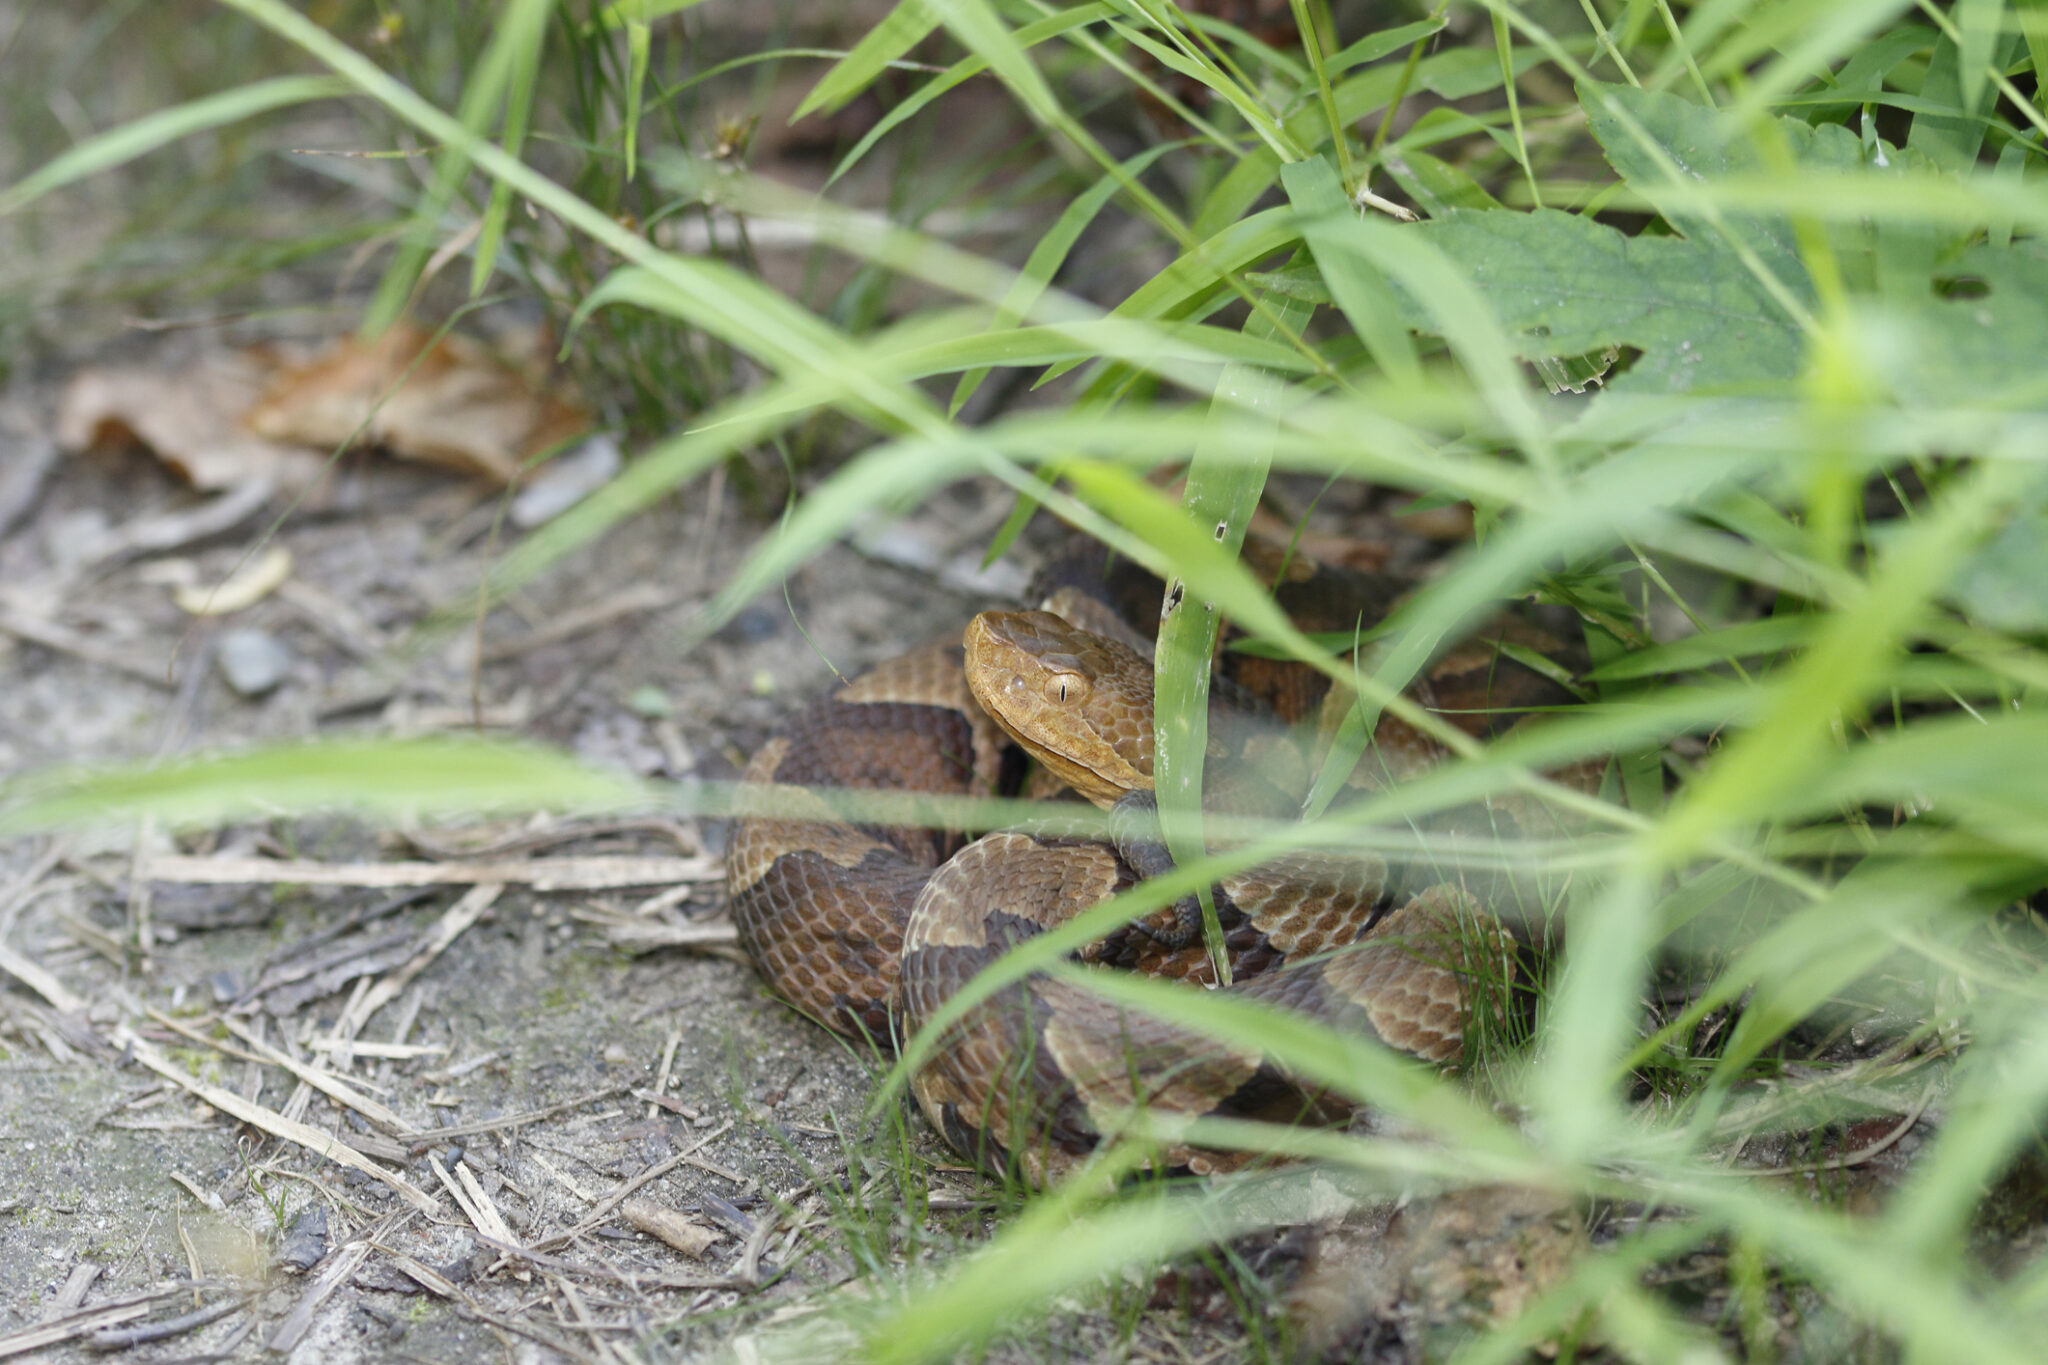 View Your Stage, It is Baby Copperhead Period In Kentucky